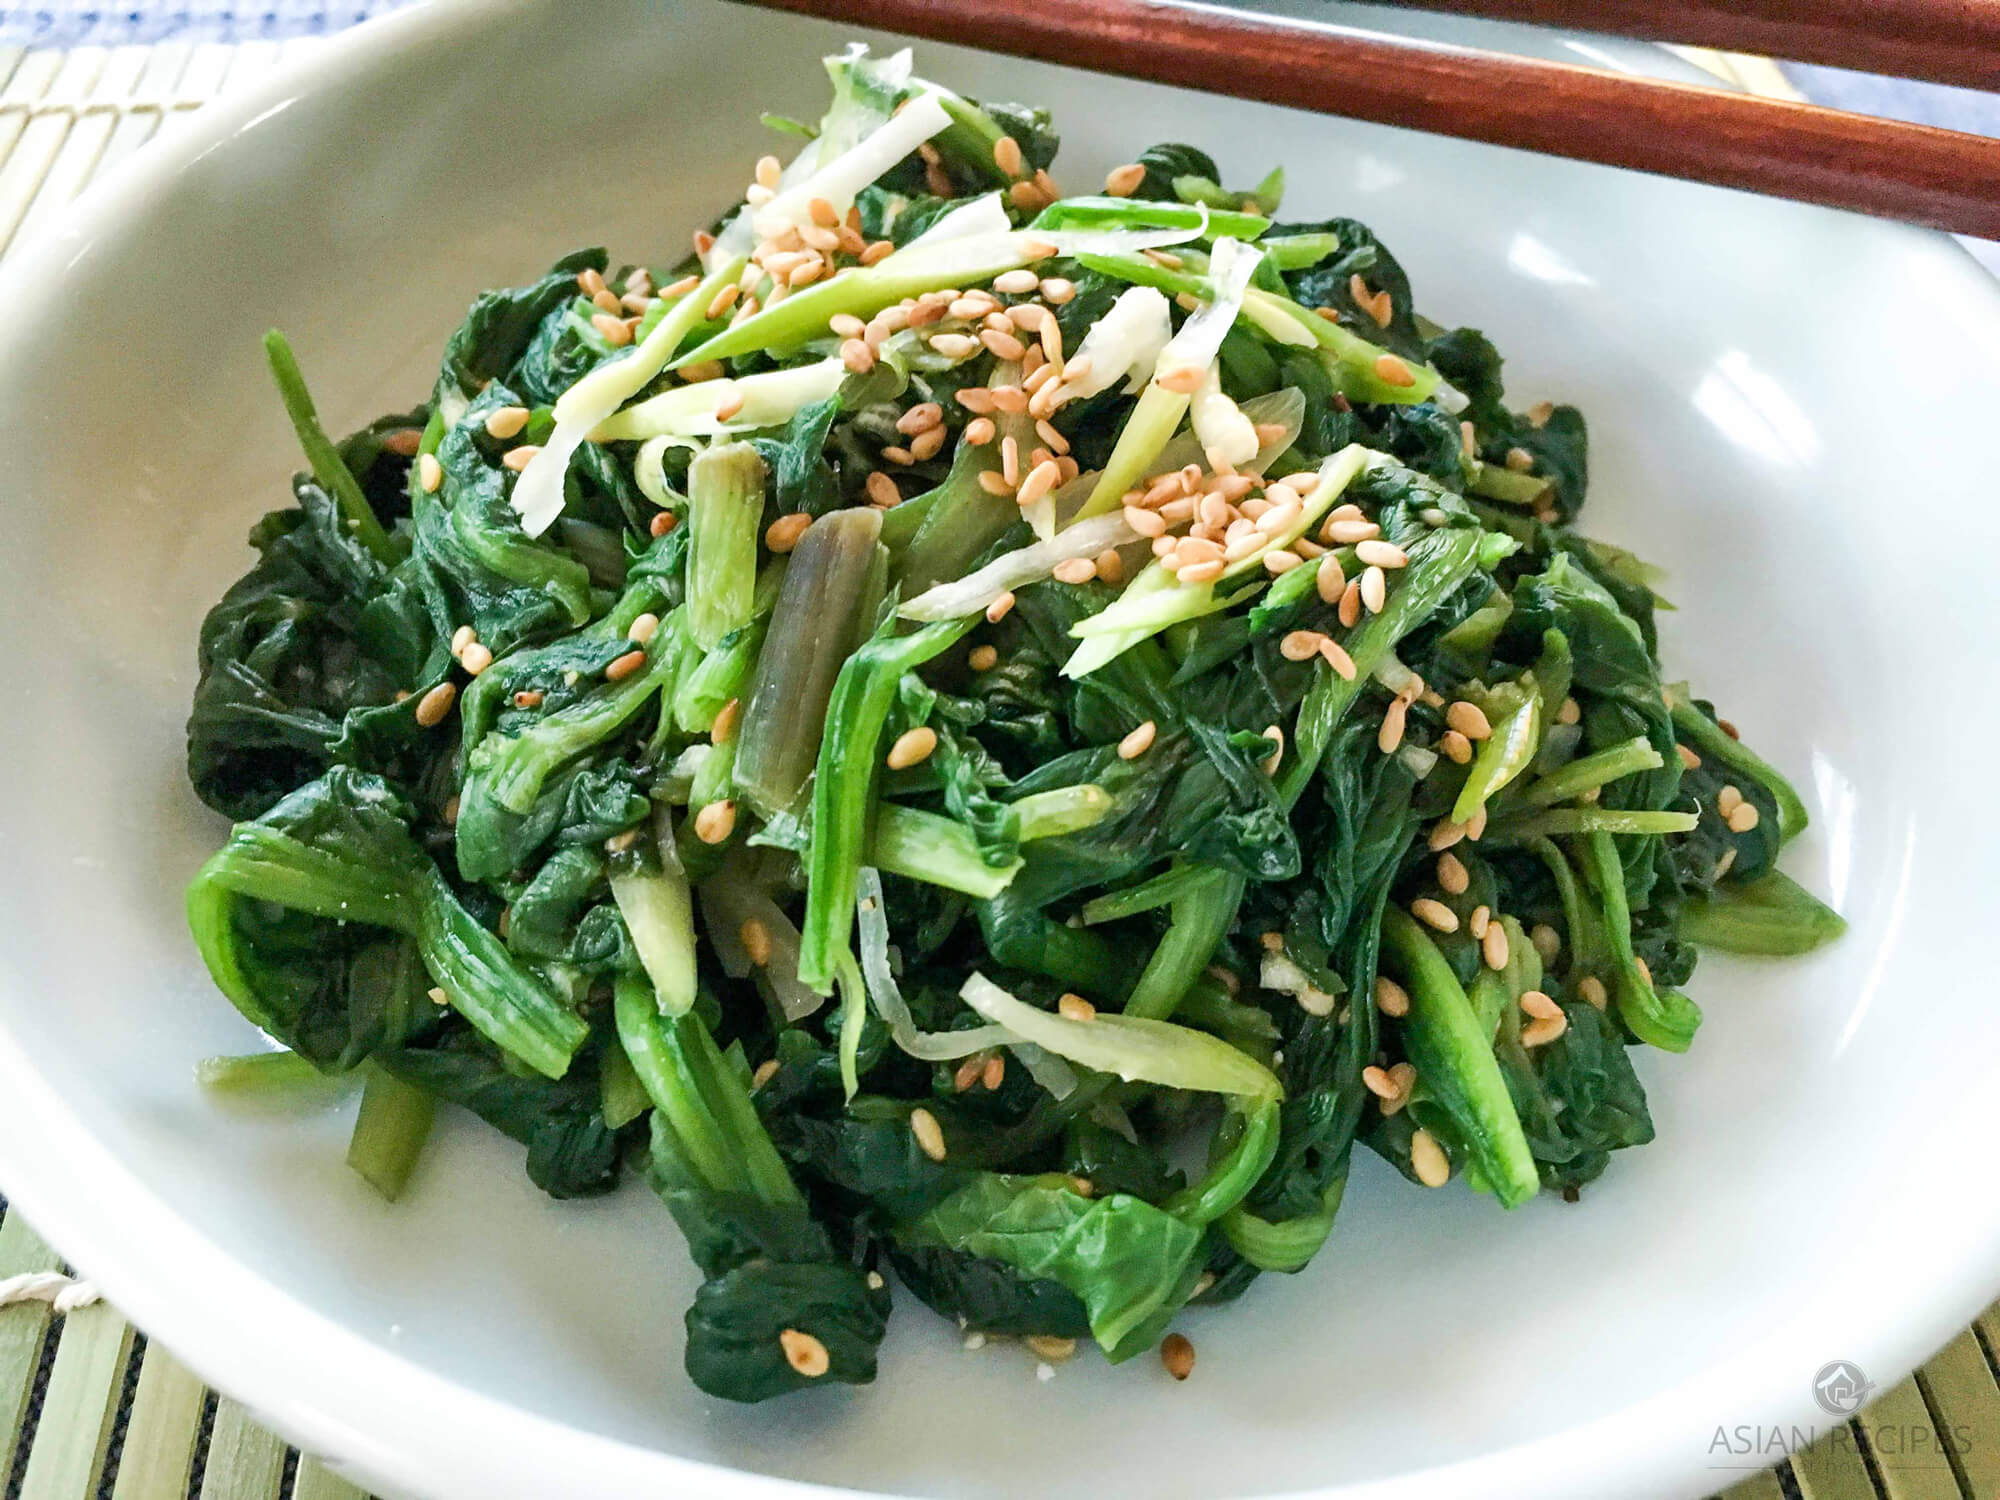 This Korean seasoned spinach side dish (sigeumchi-namul) recipe is made of blanched spinach, green onions, soy sauce, sesame seed oil, minced garlic, sesame seeds, salt and pepper.